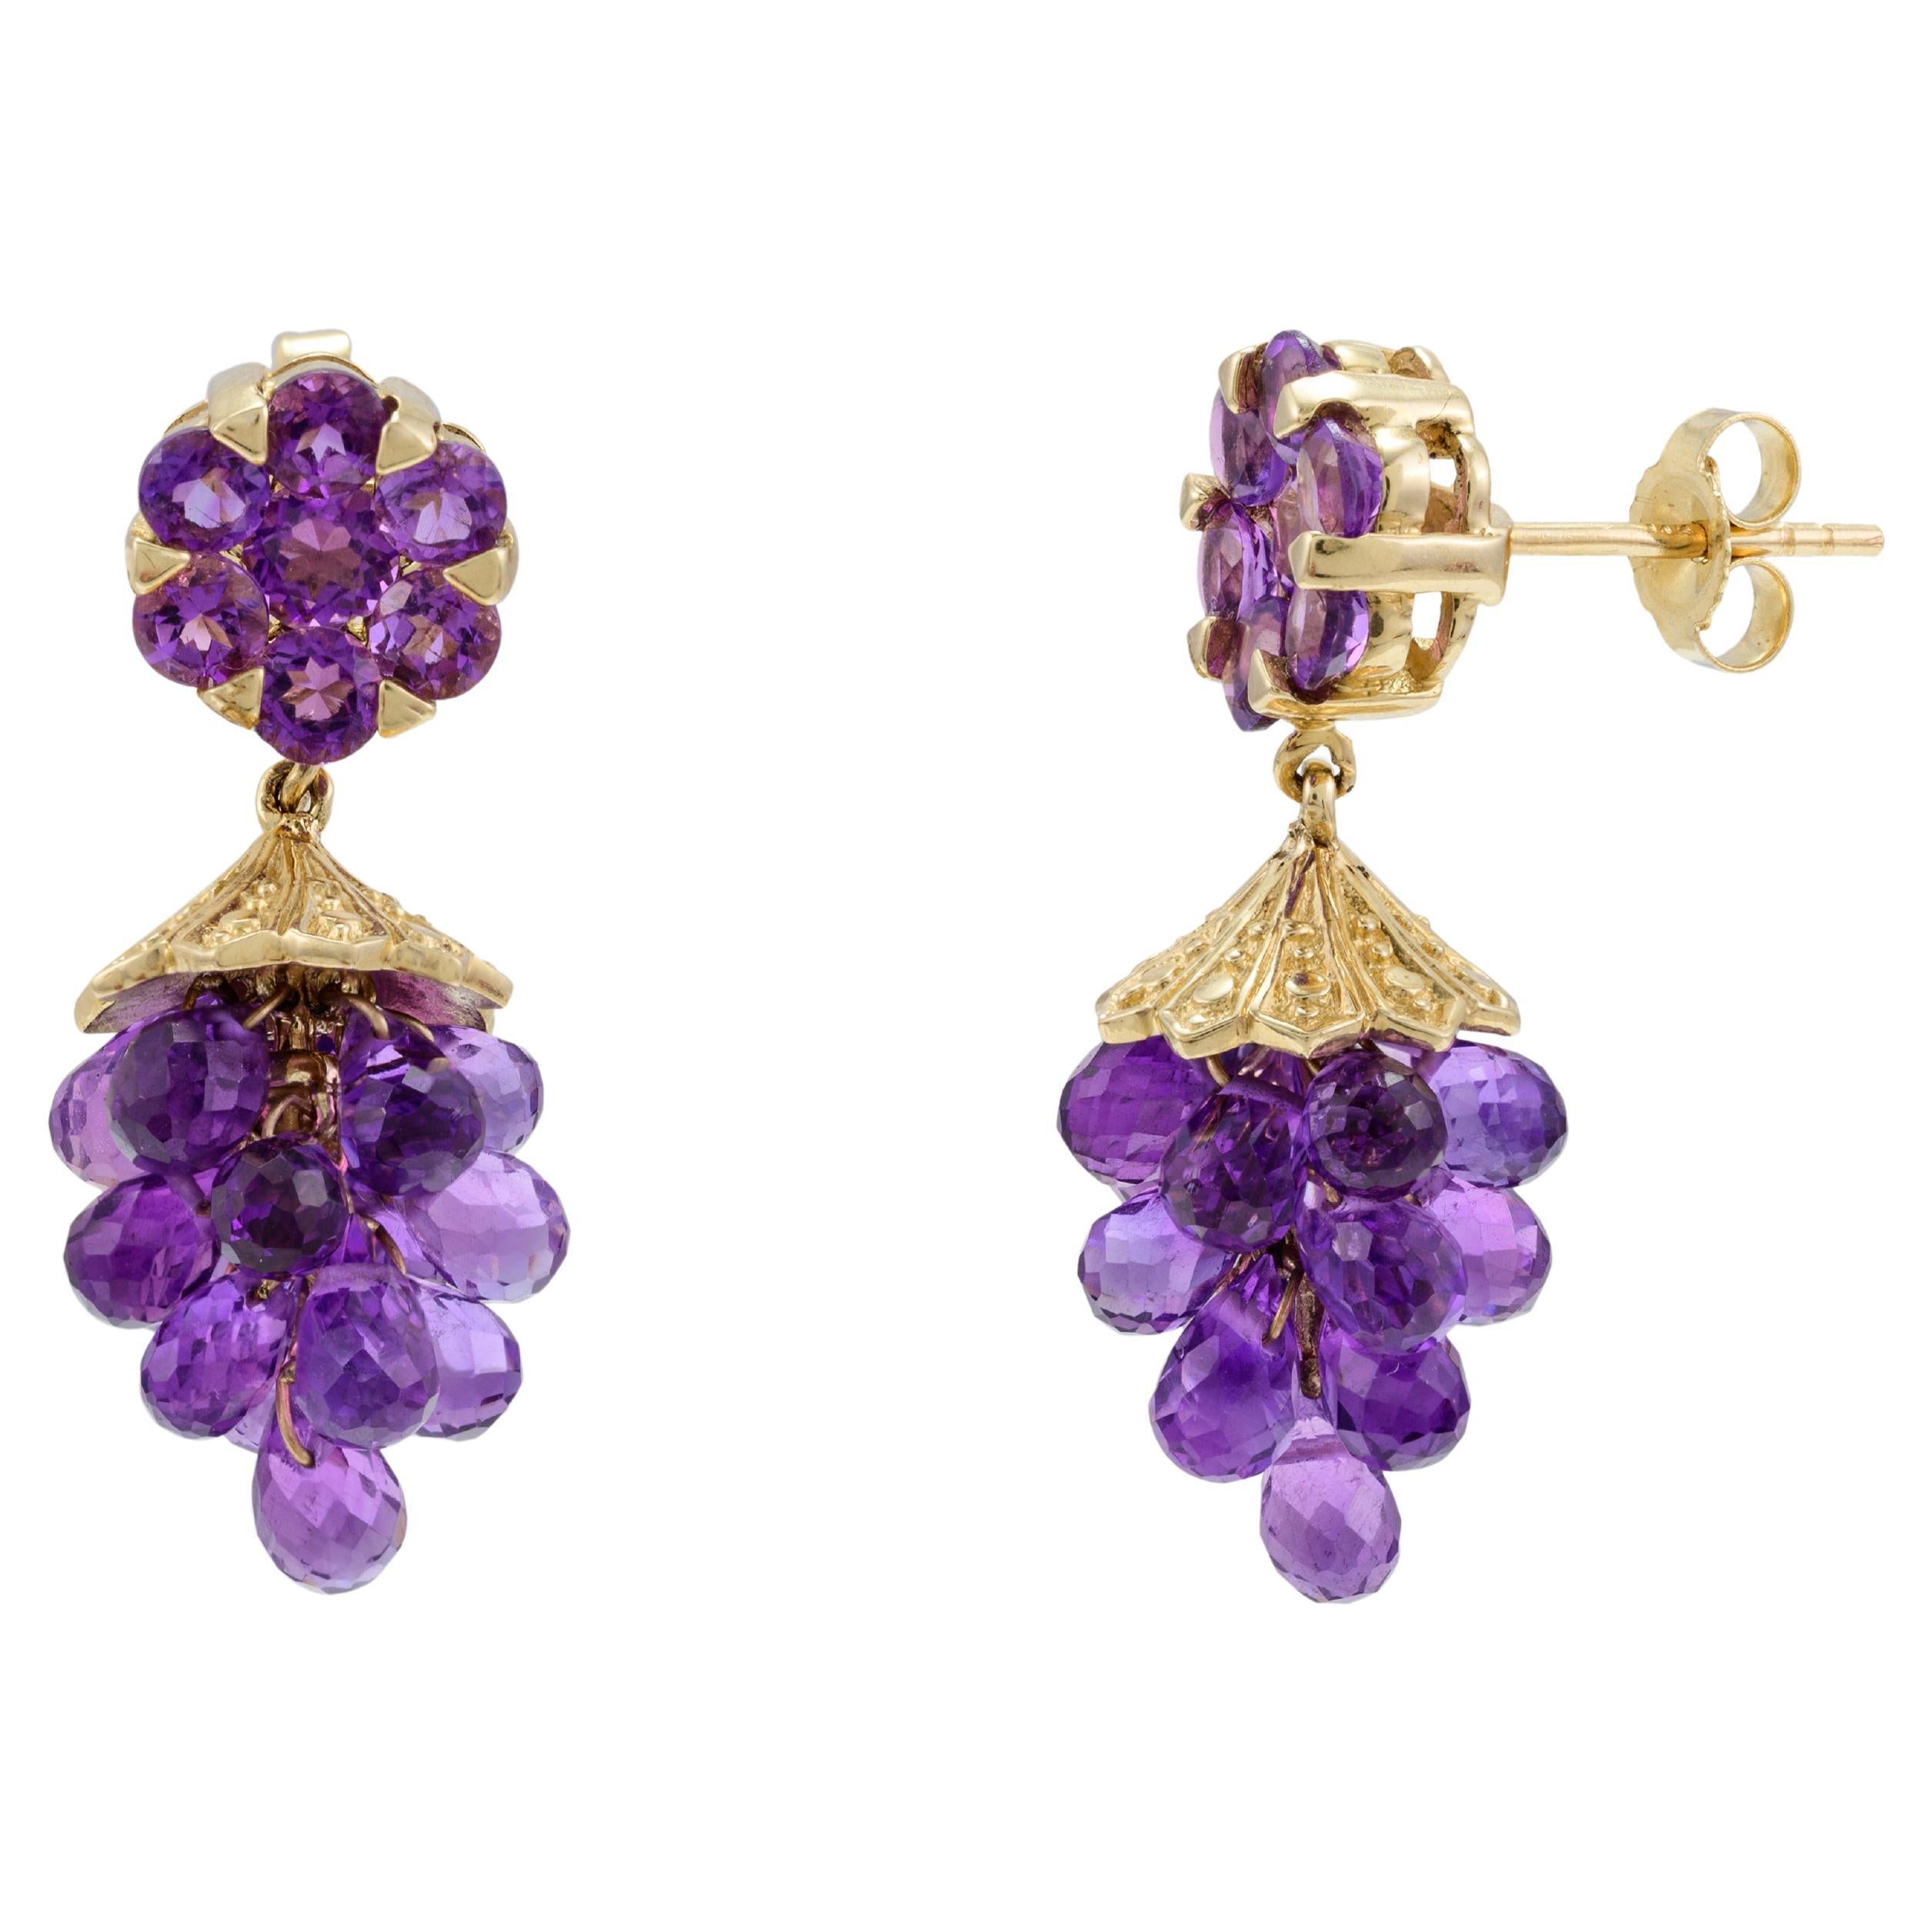 14.18 Carats Amethyst Gemstone Grapes Dangle Earrings 14k Solid Yellow Gold For Sale